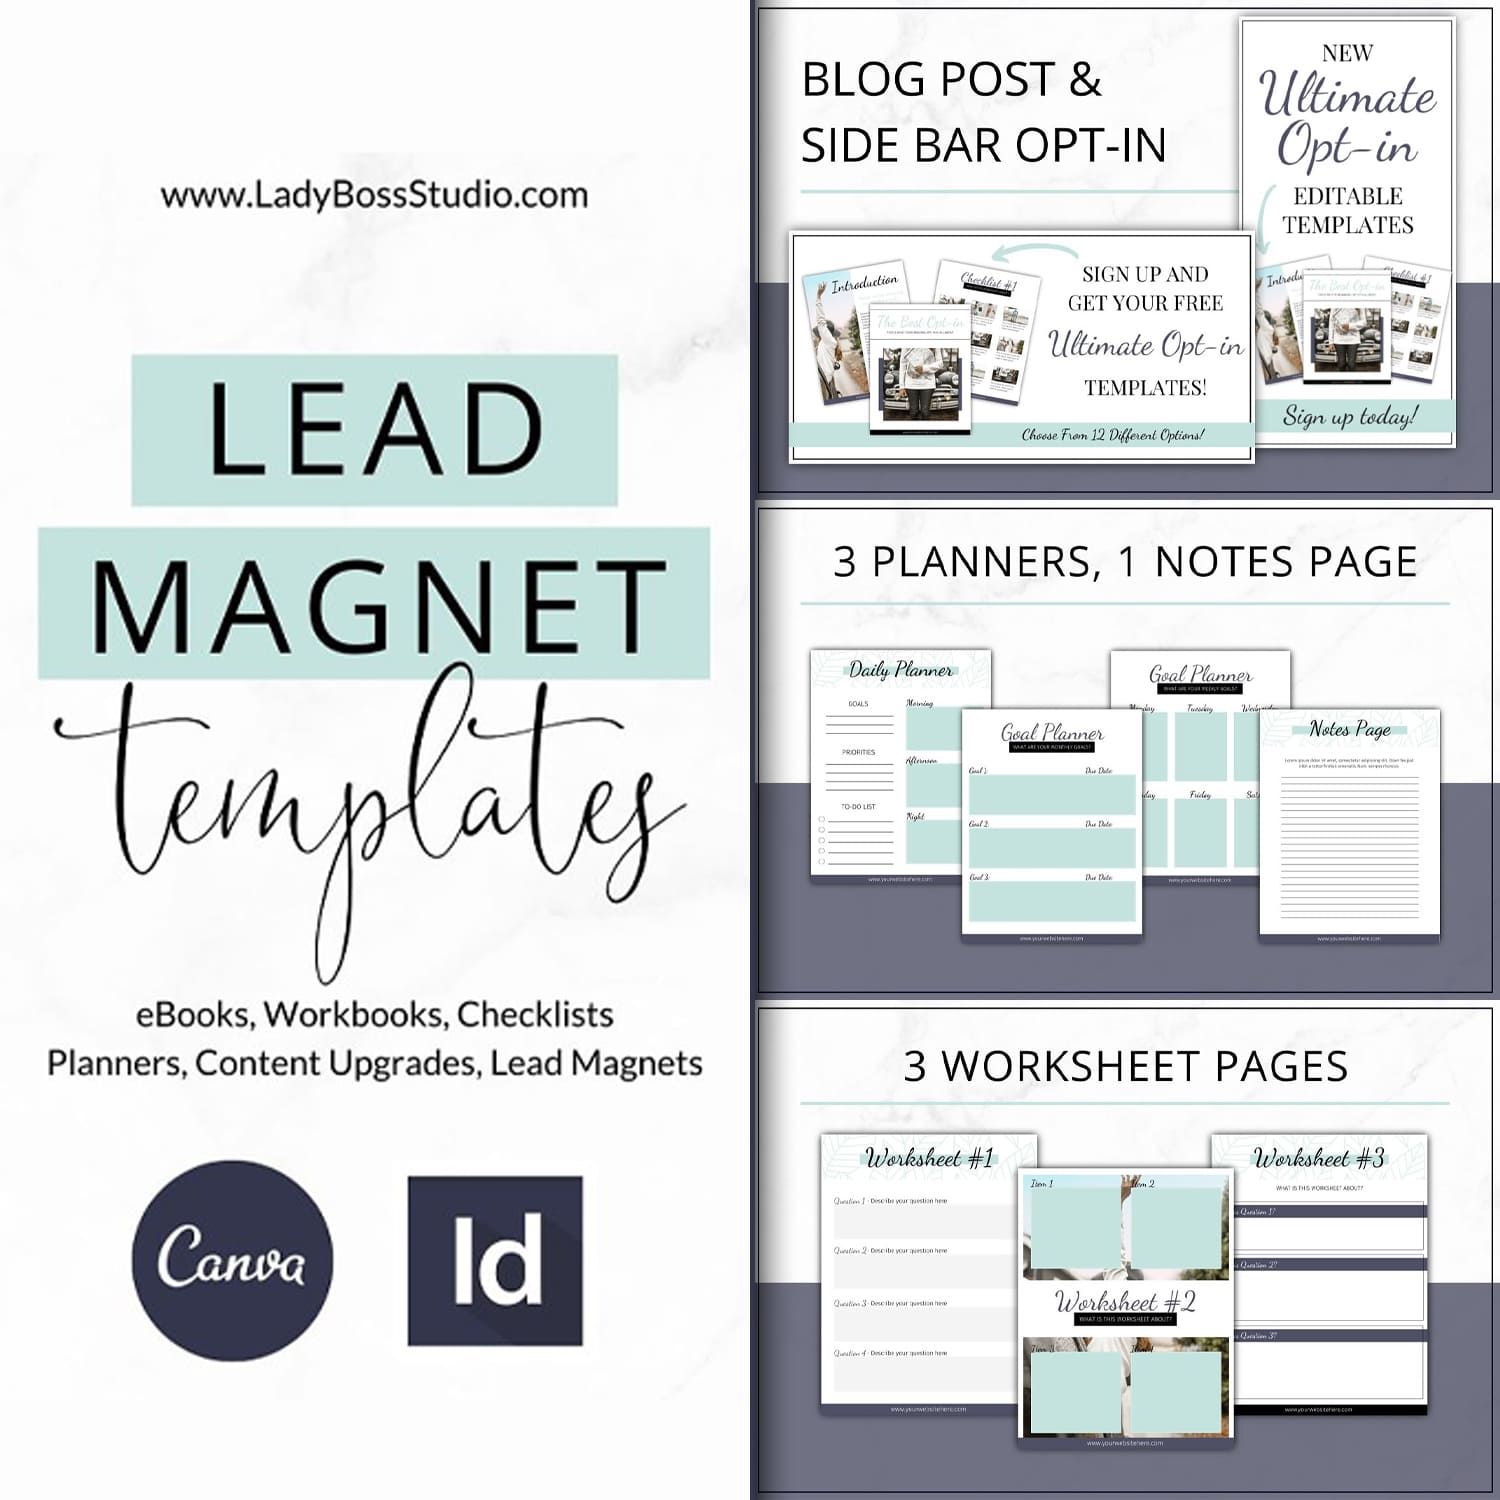 Lead Magnet Templates Canva InDesign Cover.